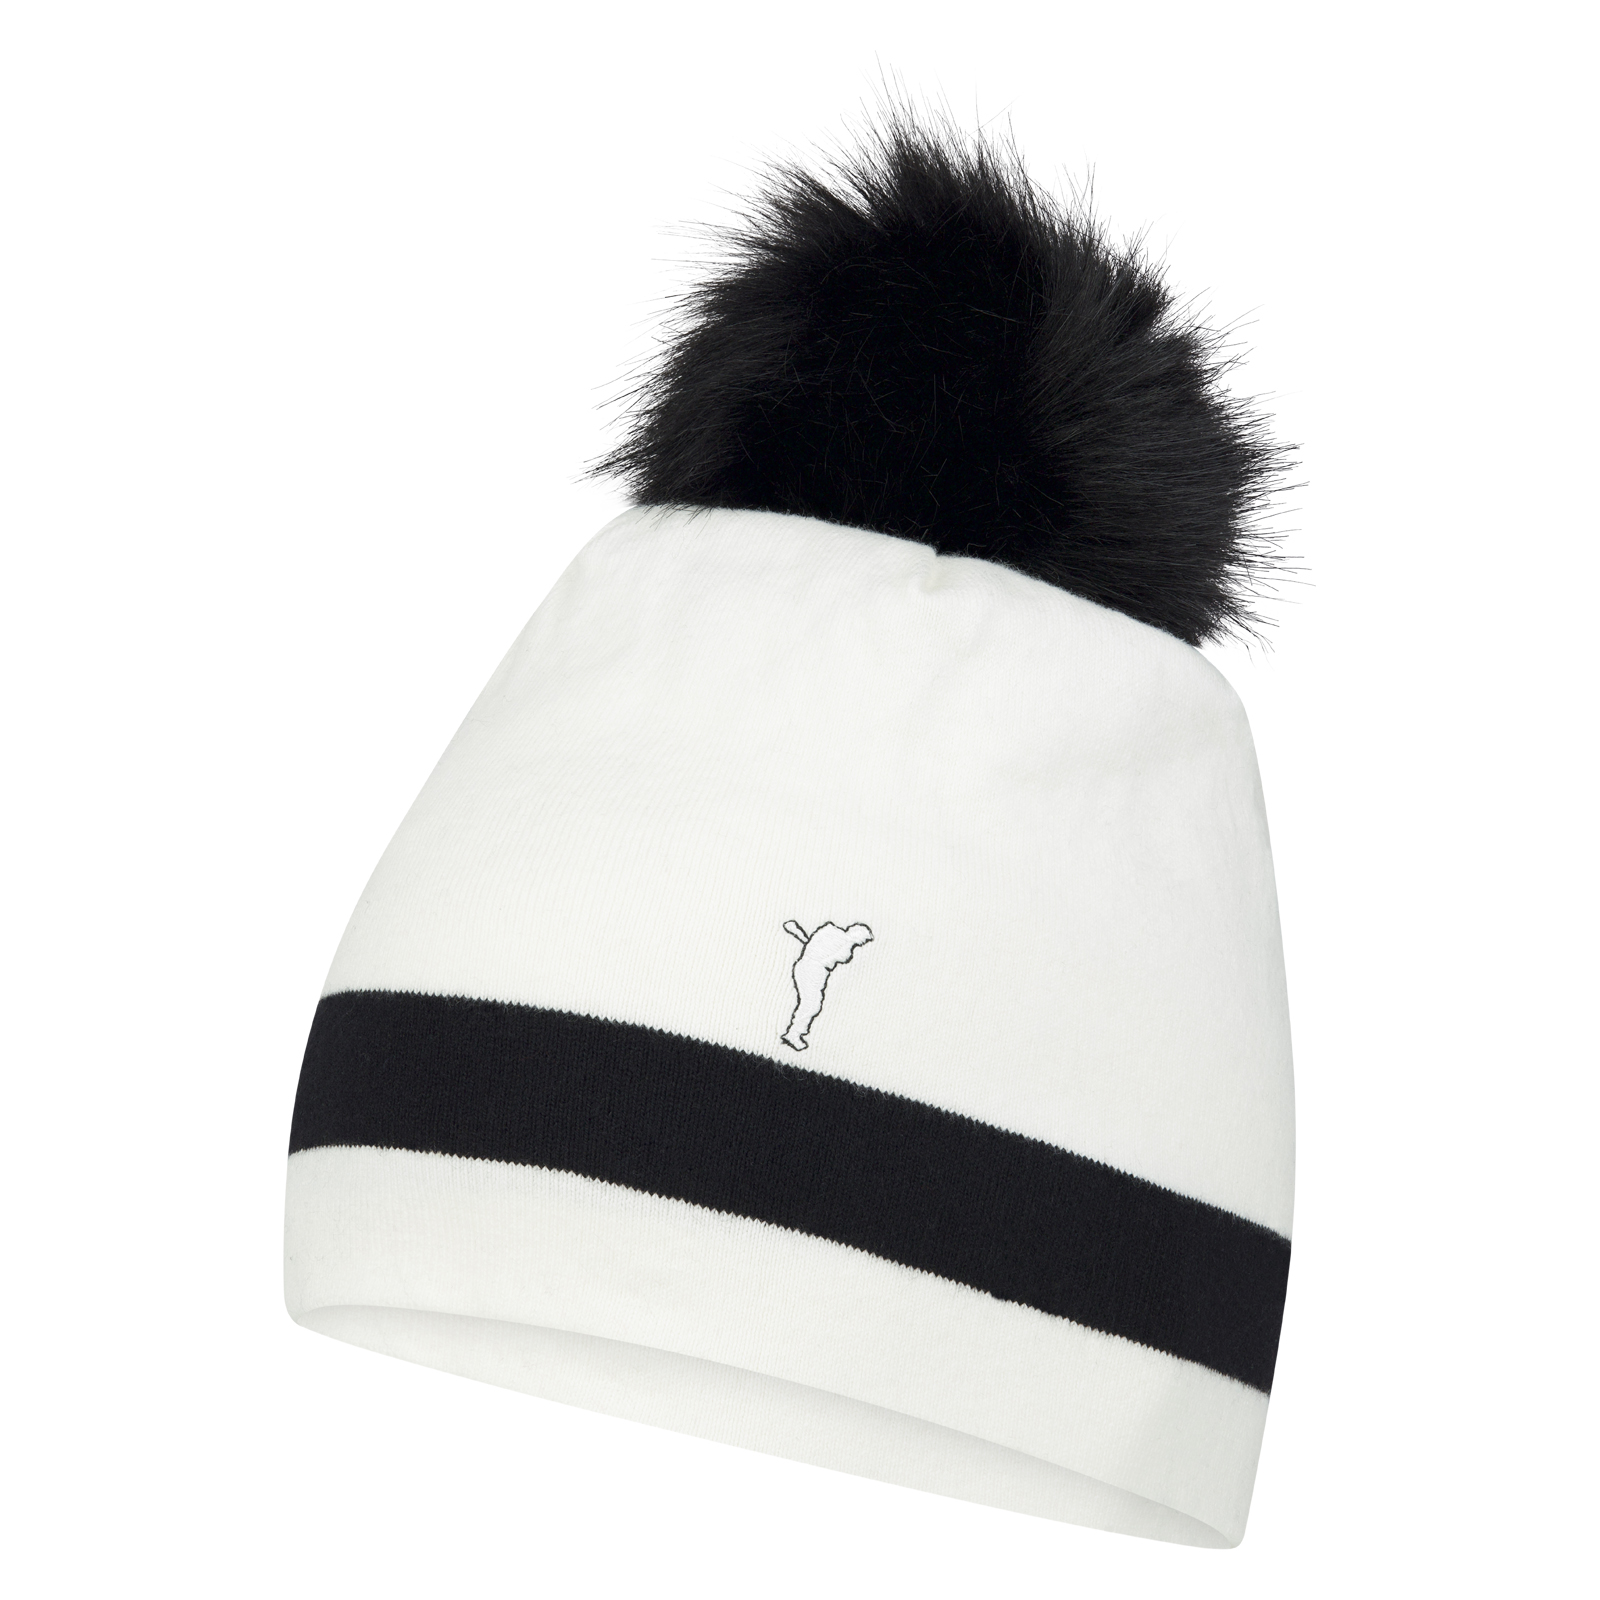 Ladies' knitted pompom hat with cashmere